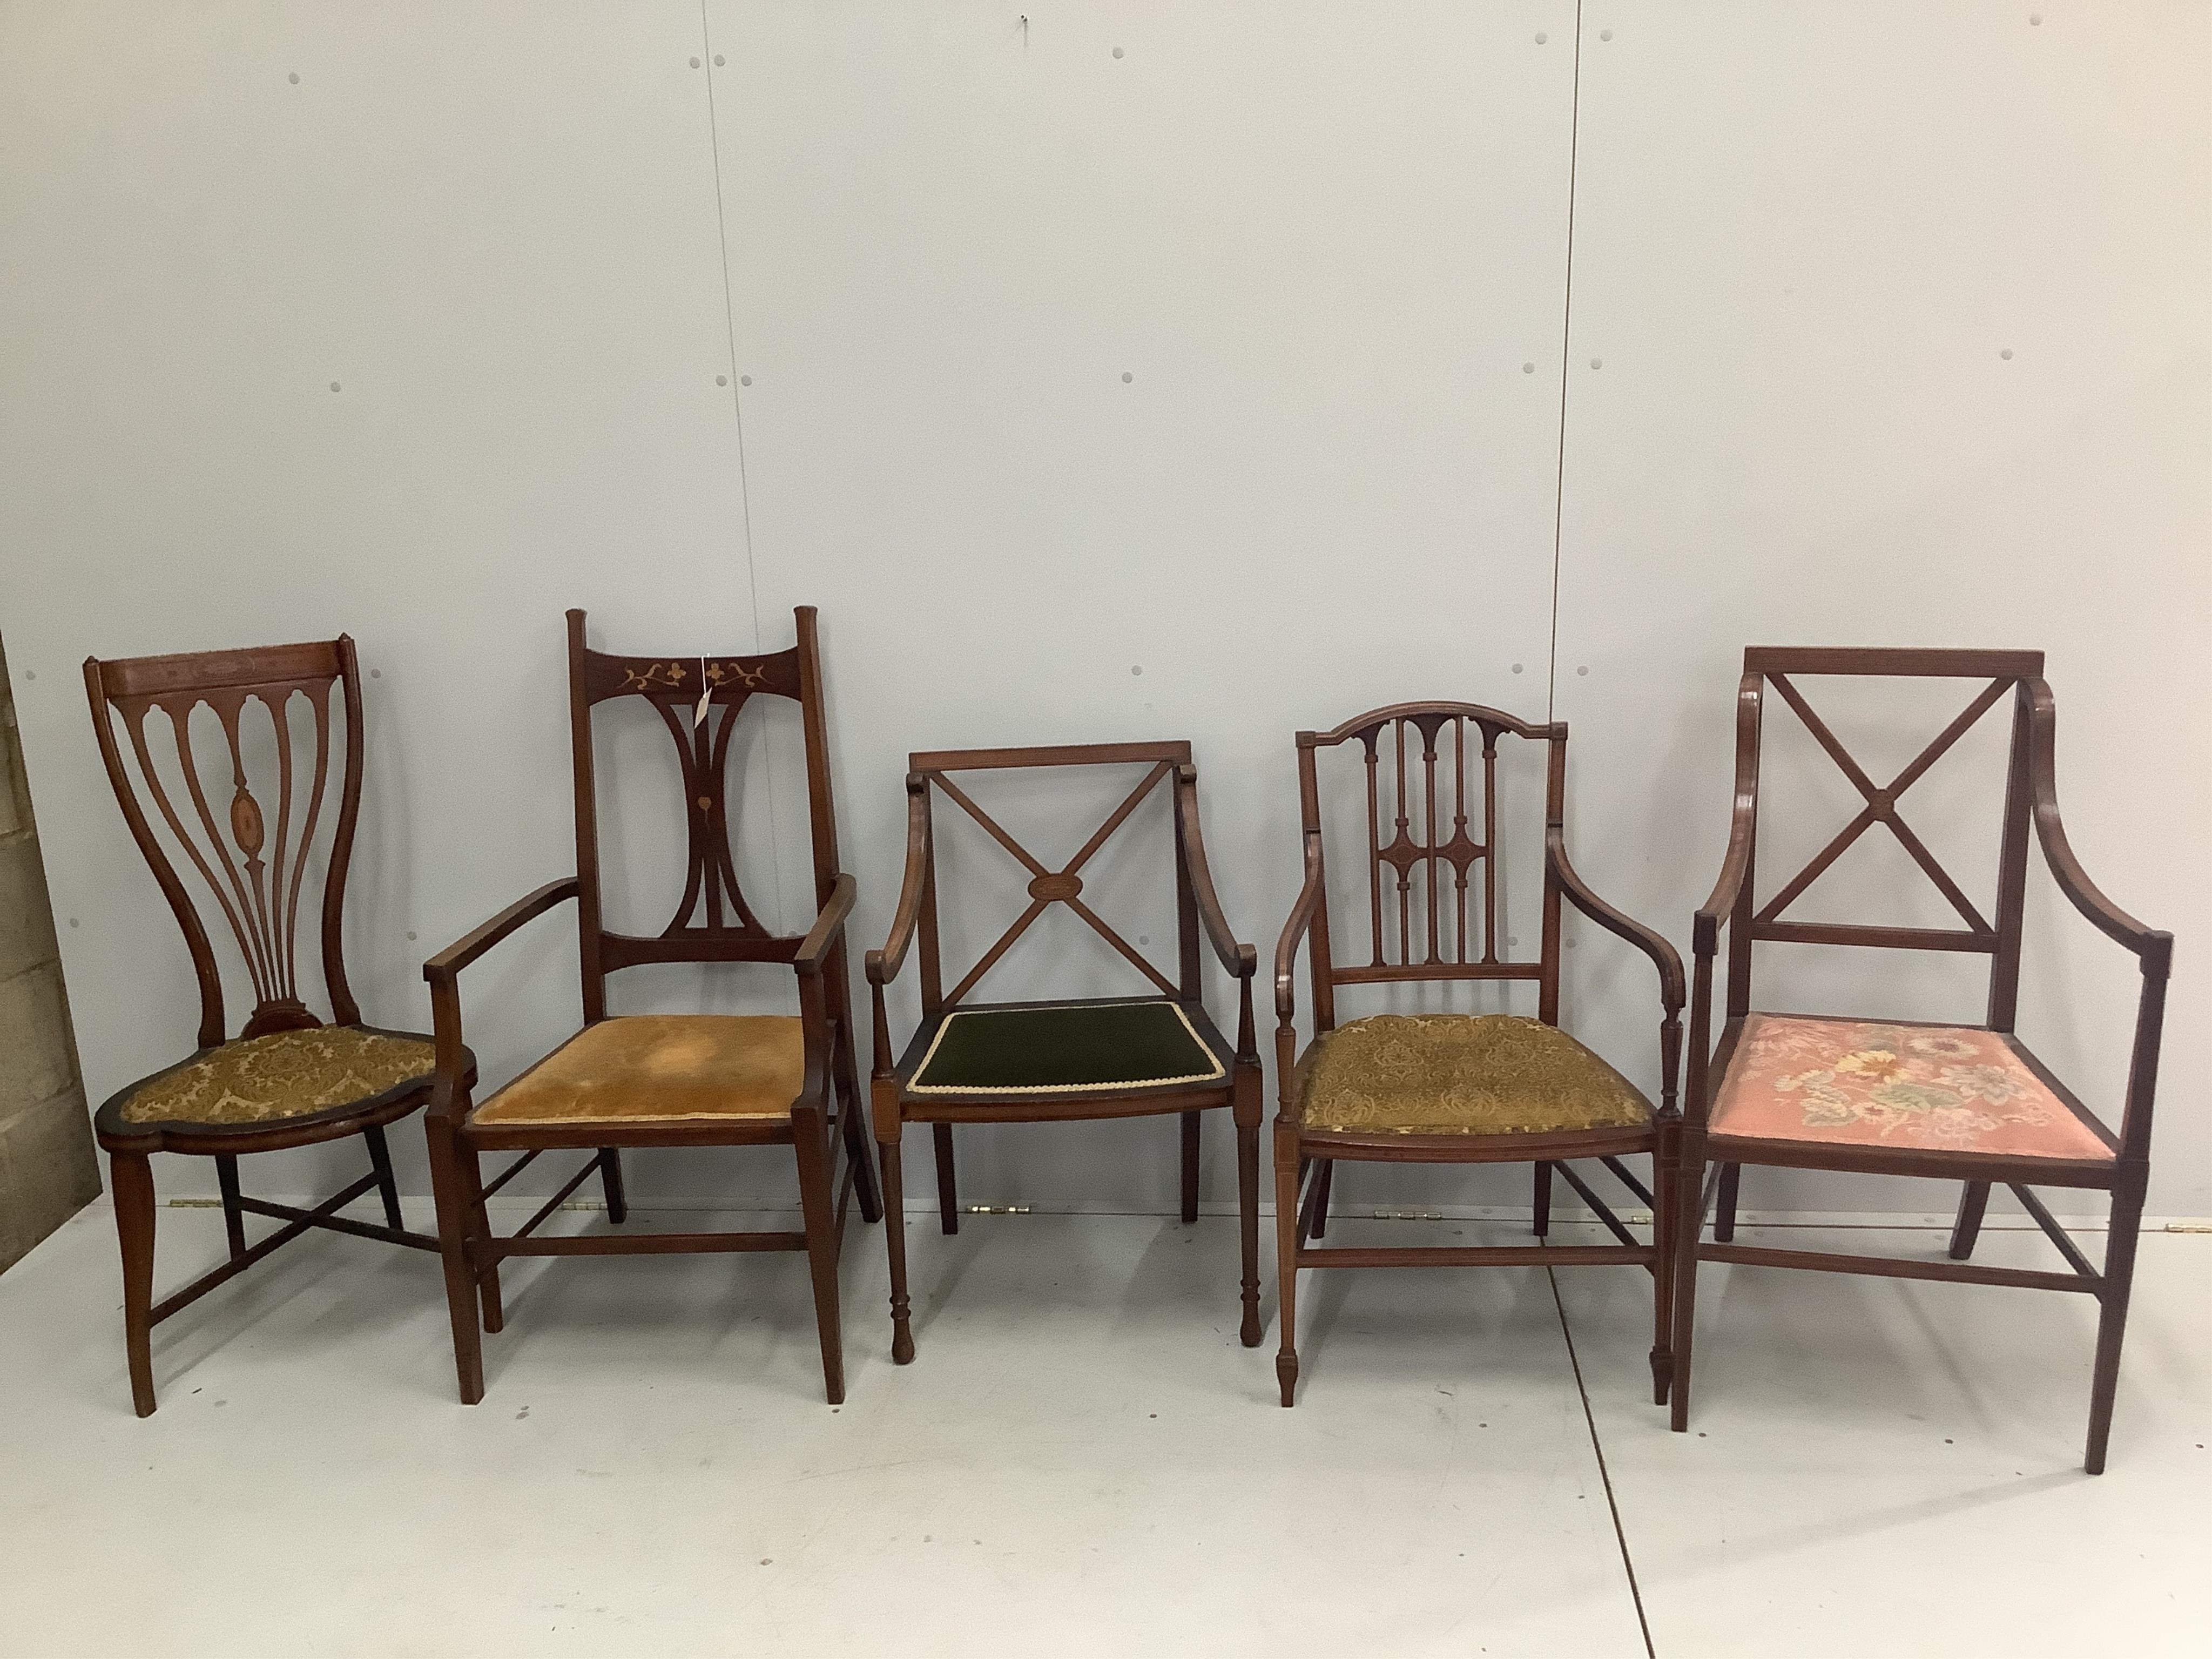 Five Shoolbred Edwardian / Art Nouveau inlaid mahogany side chairs, largest height 102cm. Condition - fair